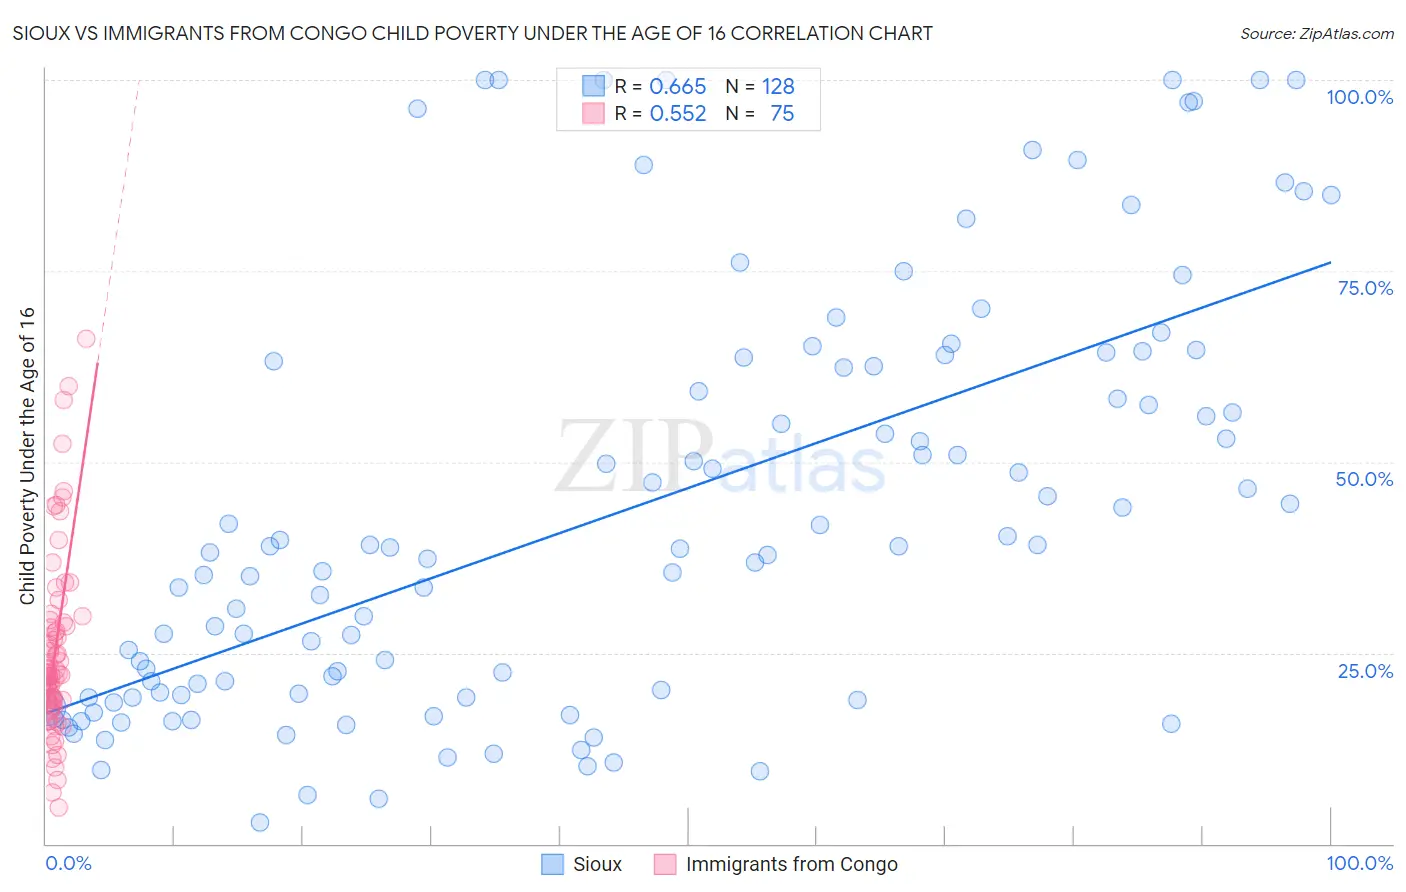 Sioux vs Immigrants from Congo Child Poverty Under the Age of 16